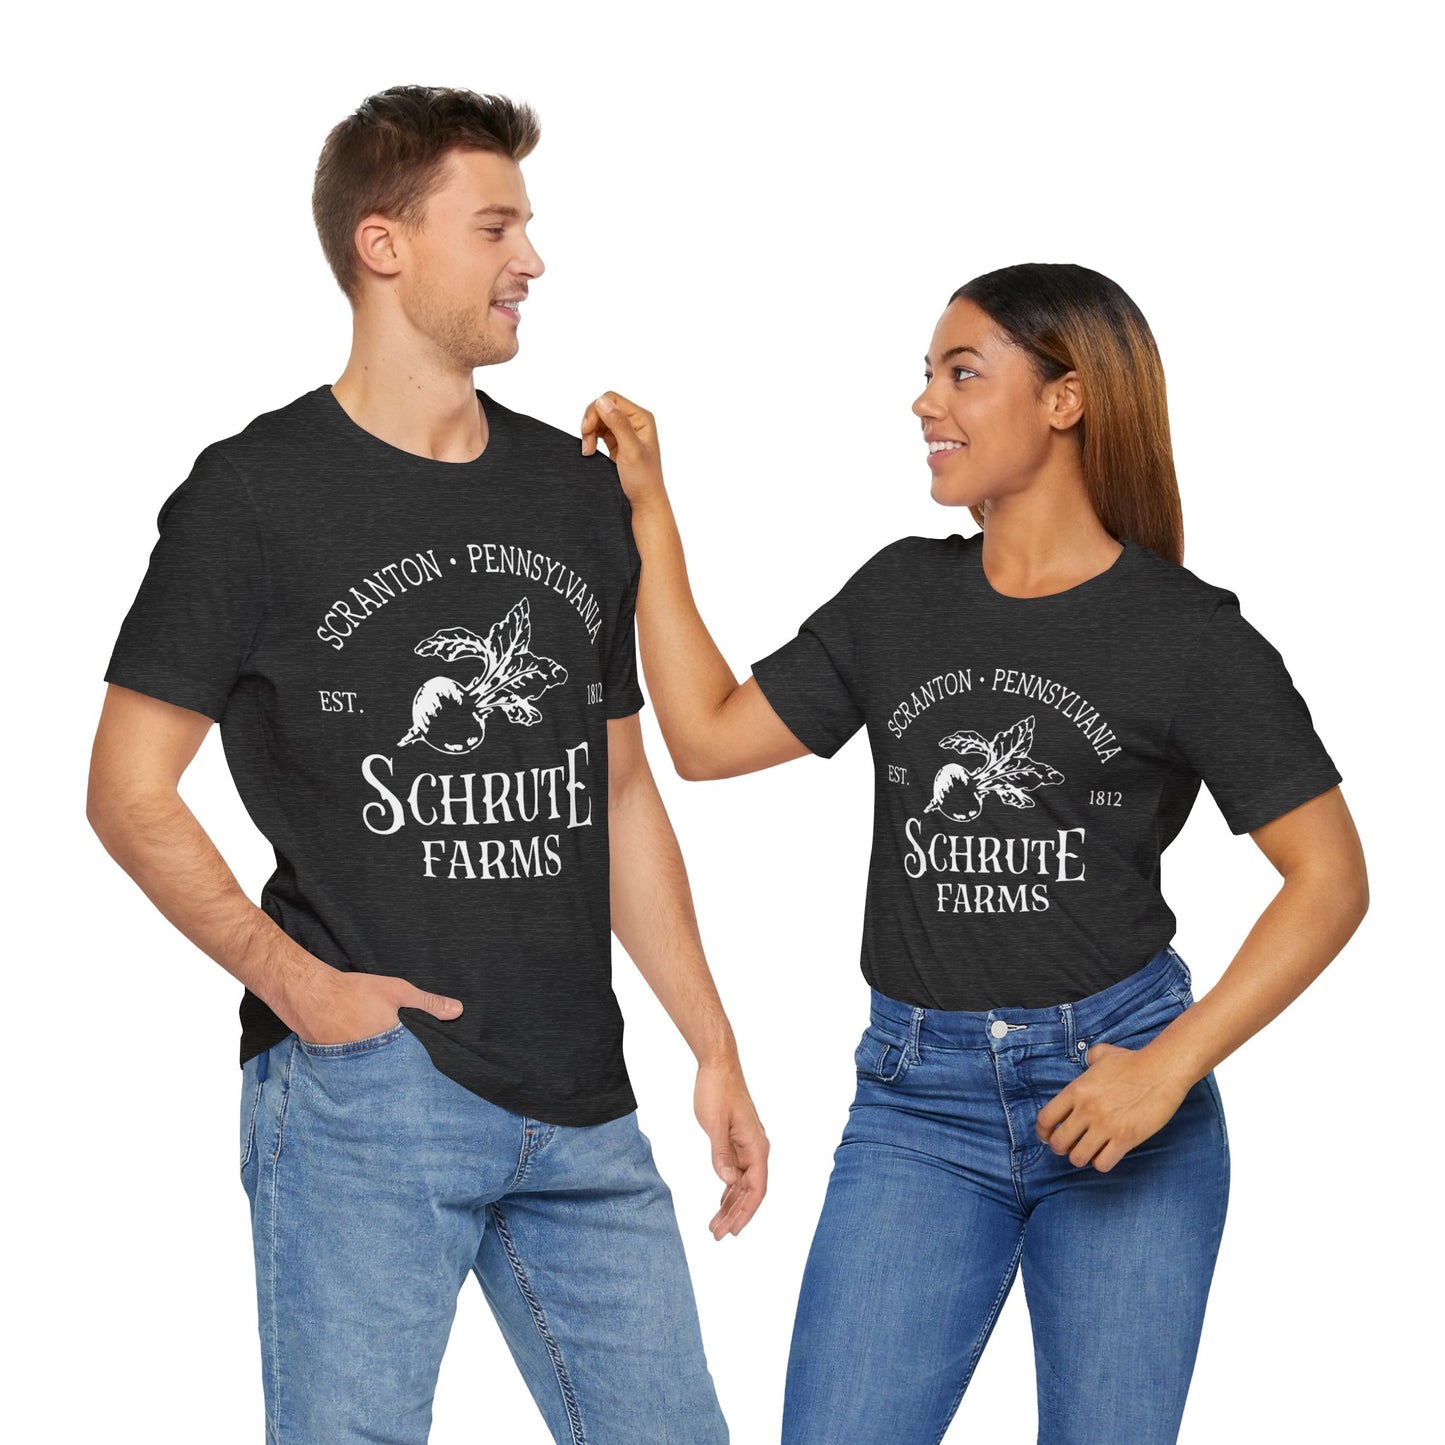 Schrute Farms - The Office T-shirt